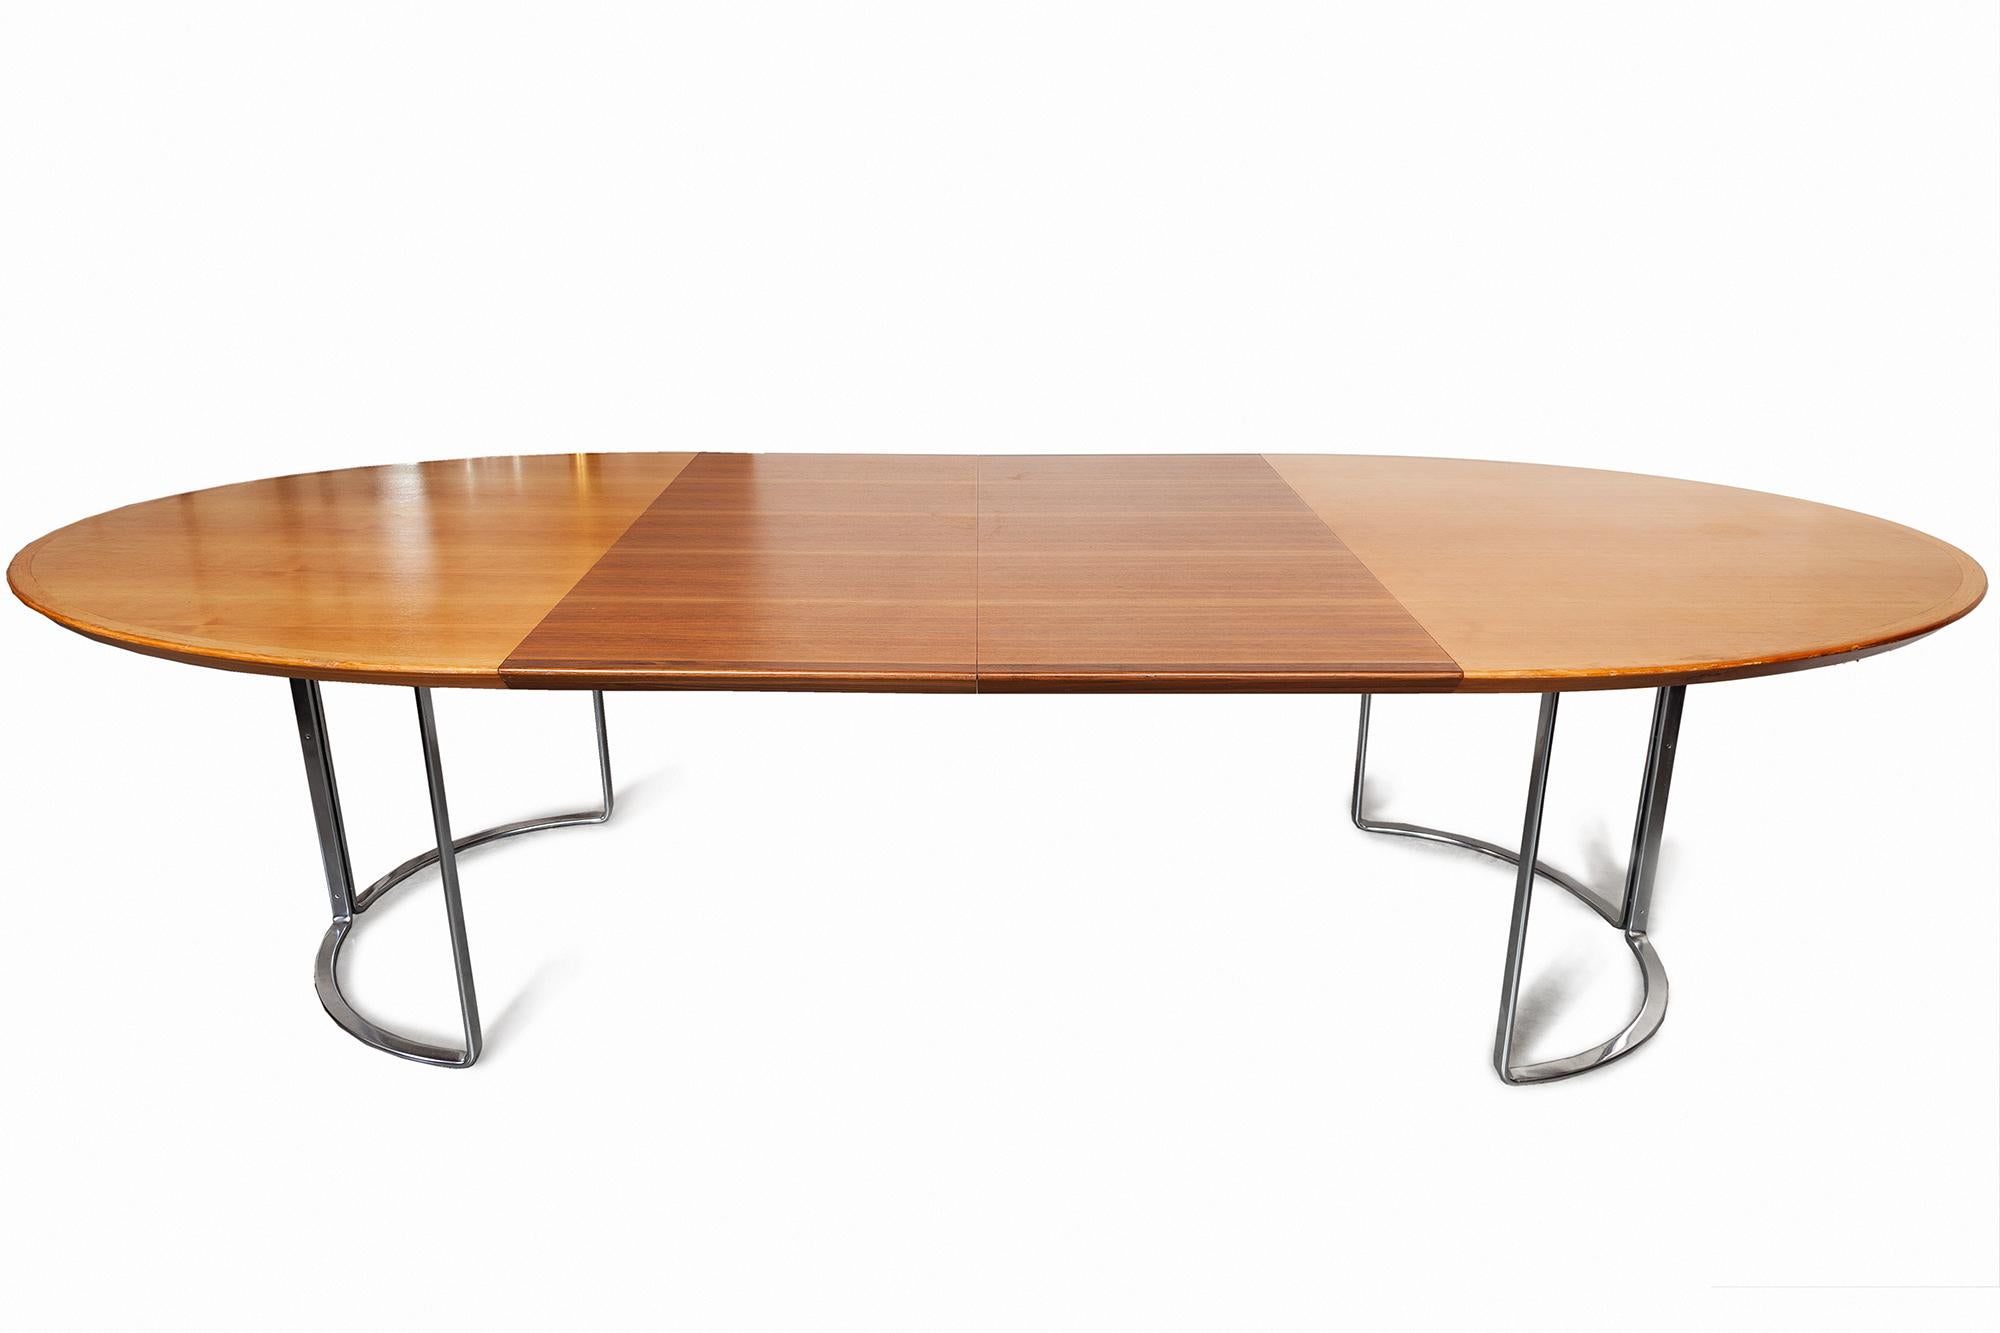 Hand-Crafted Extendable Walnut Table by Horst Bruning for Kill International, 1970s